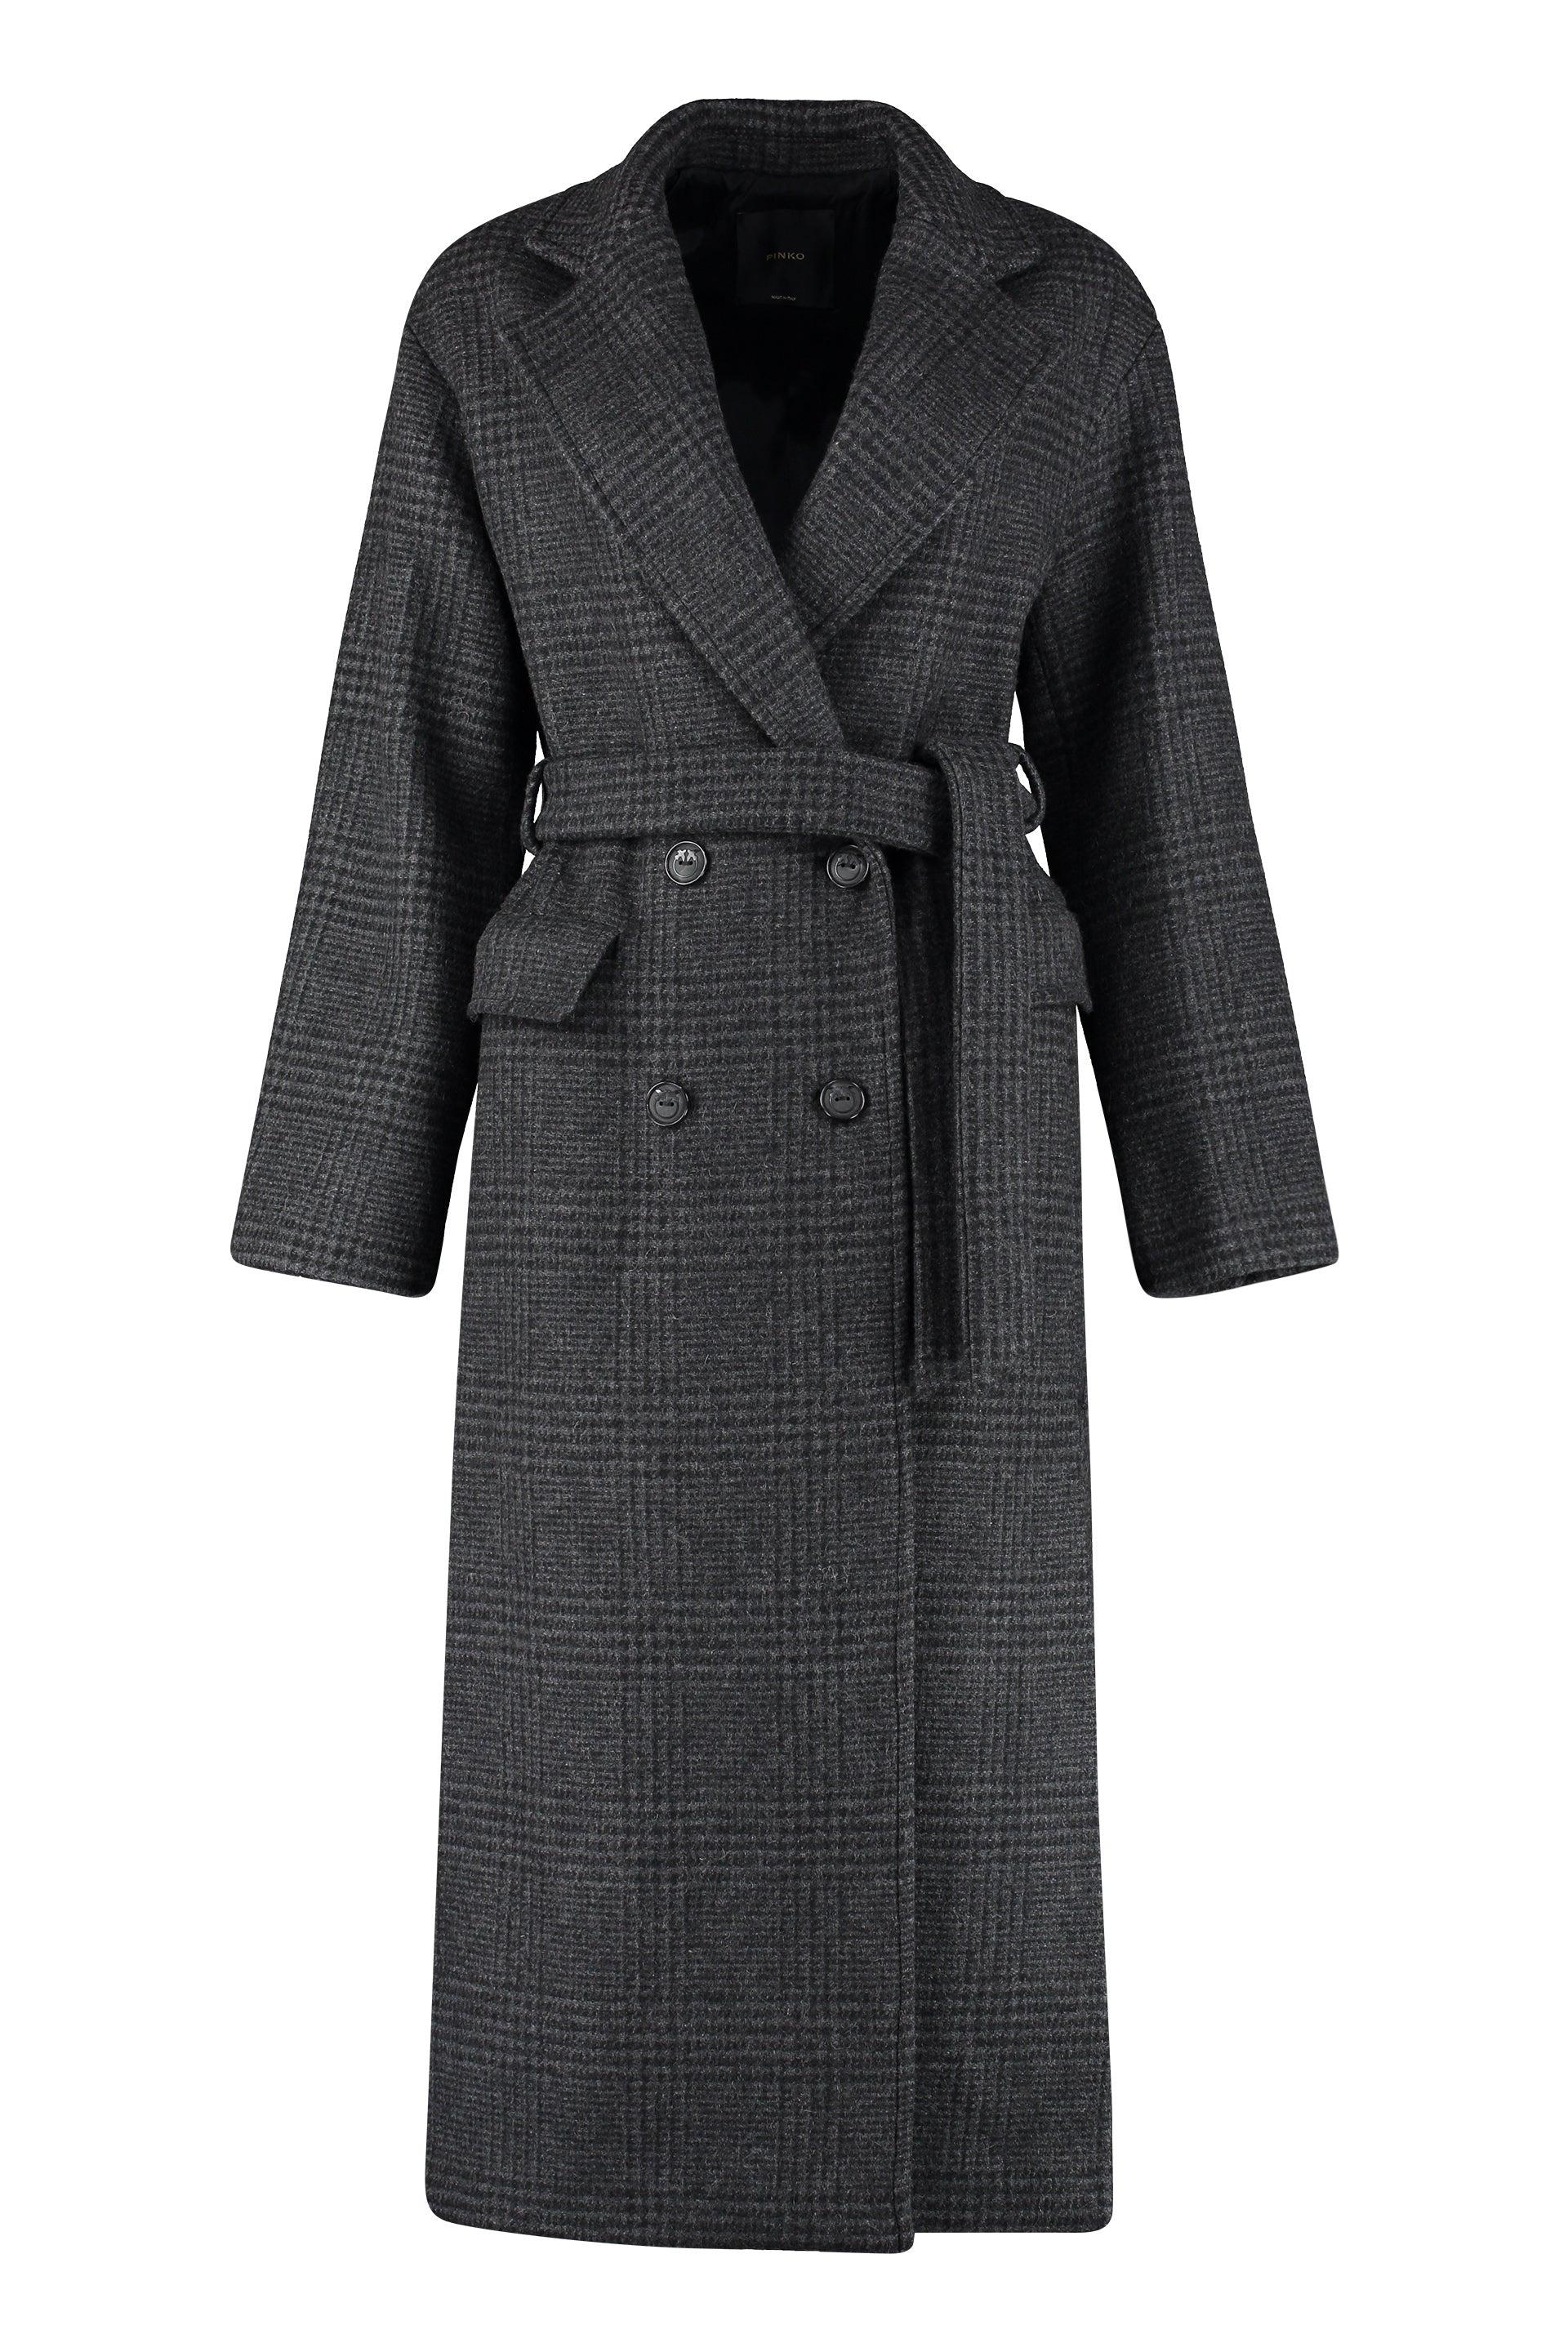 Pinko Giacomo Double-breasted Prince-of-wales Wool Coat in Black | Lyst